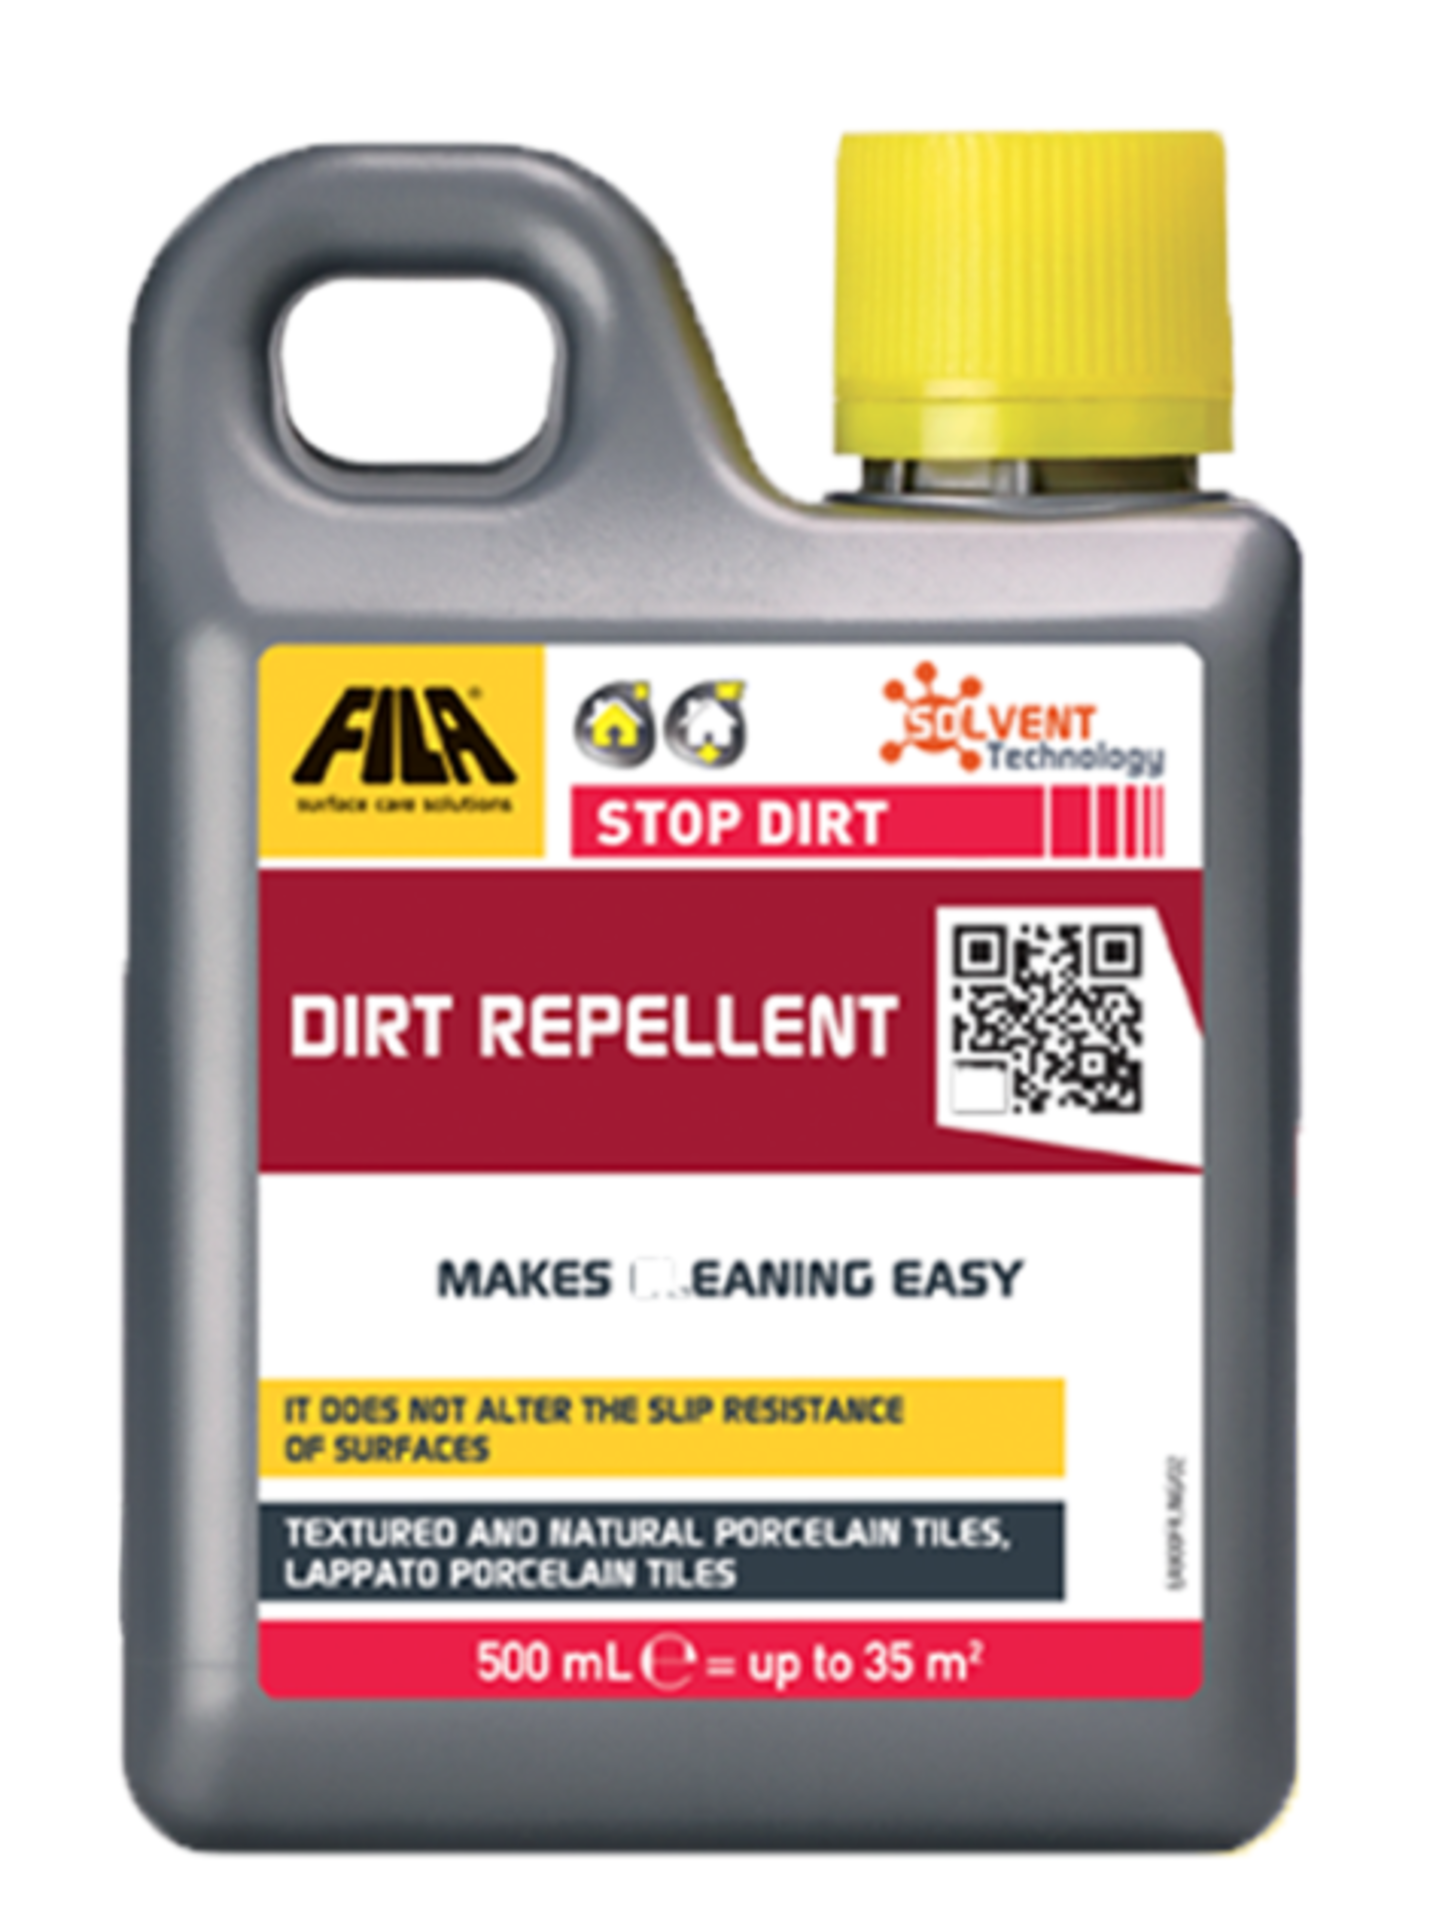 Fila - Stop-Dirt Easy Cleaning Dirt Repellent - 500ml = Upto 35m - New.